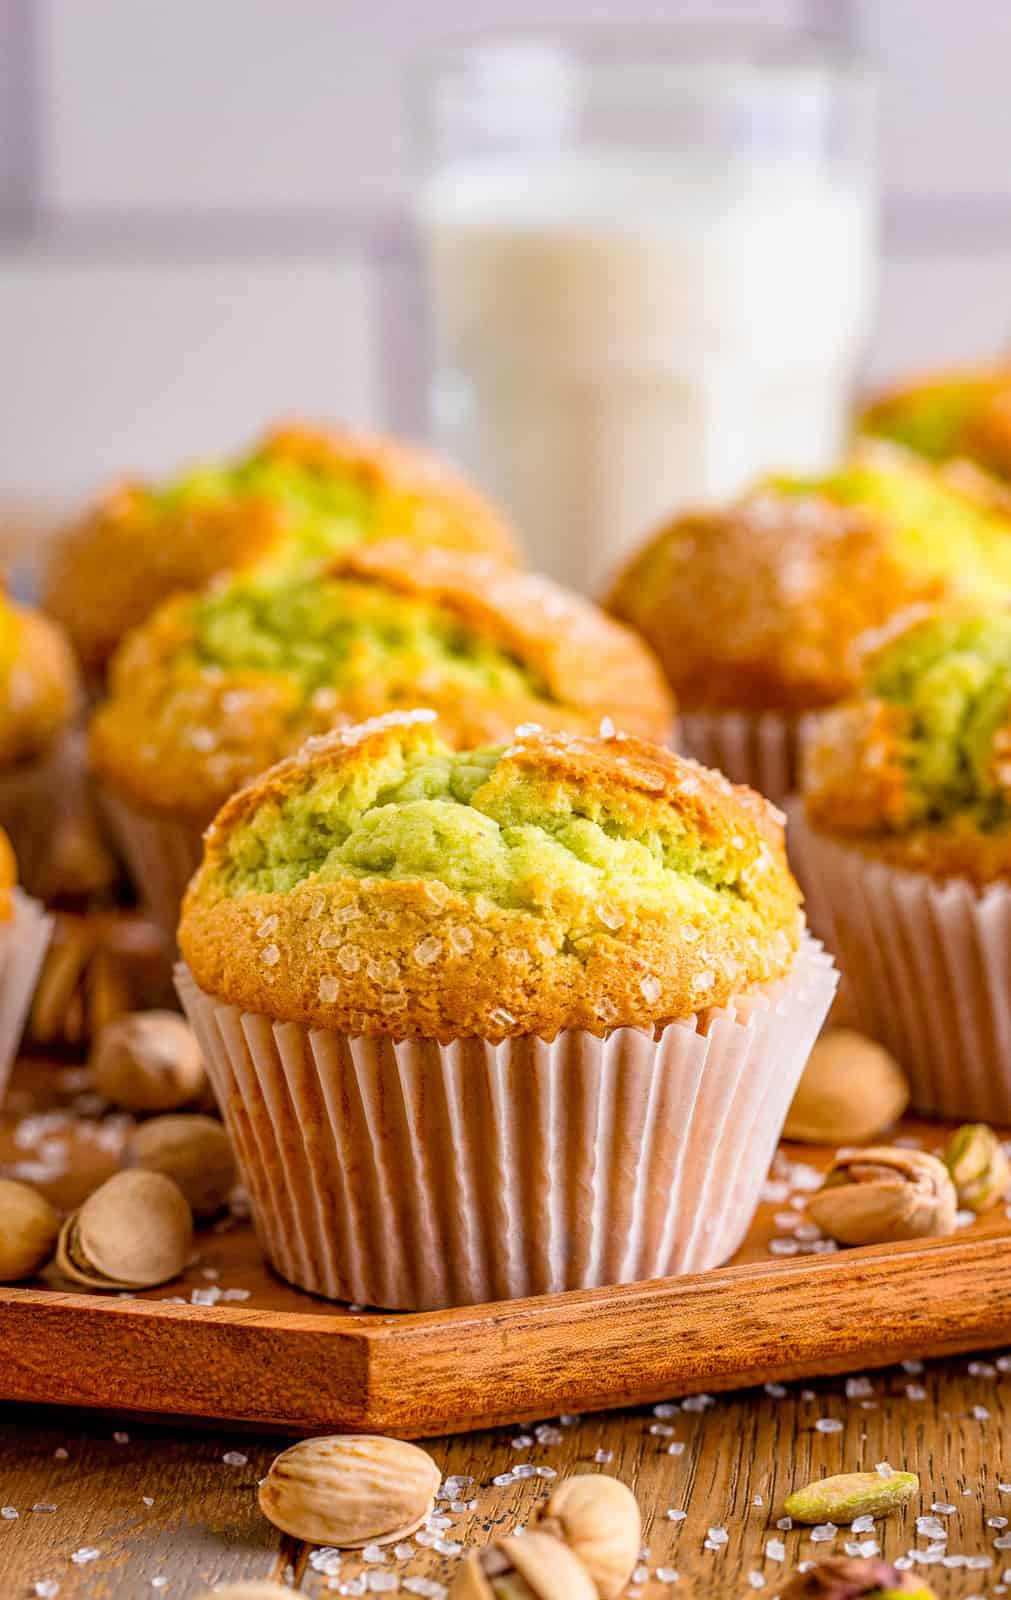 Pistachio Muffins on wooden board with muffins behind it with pistachios.